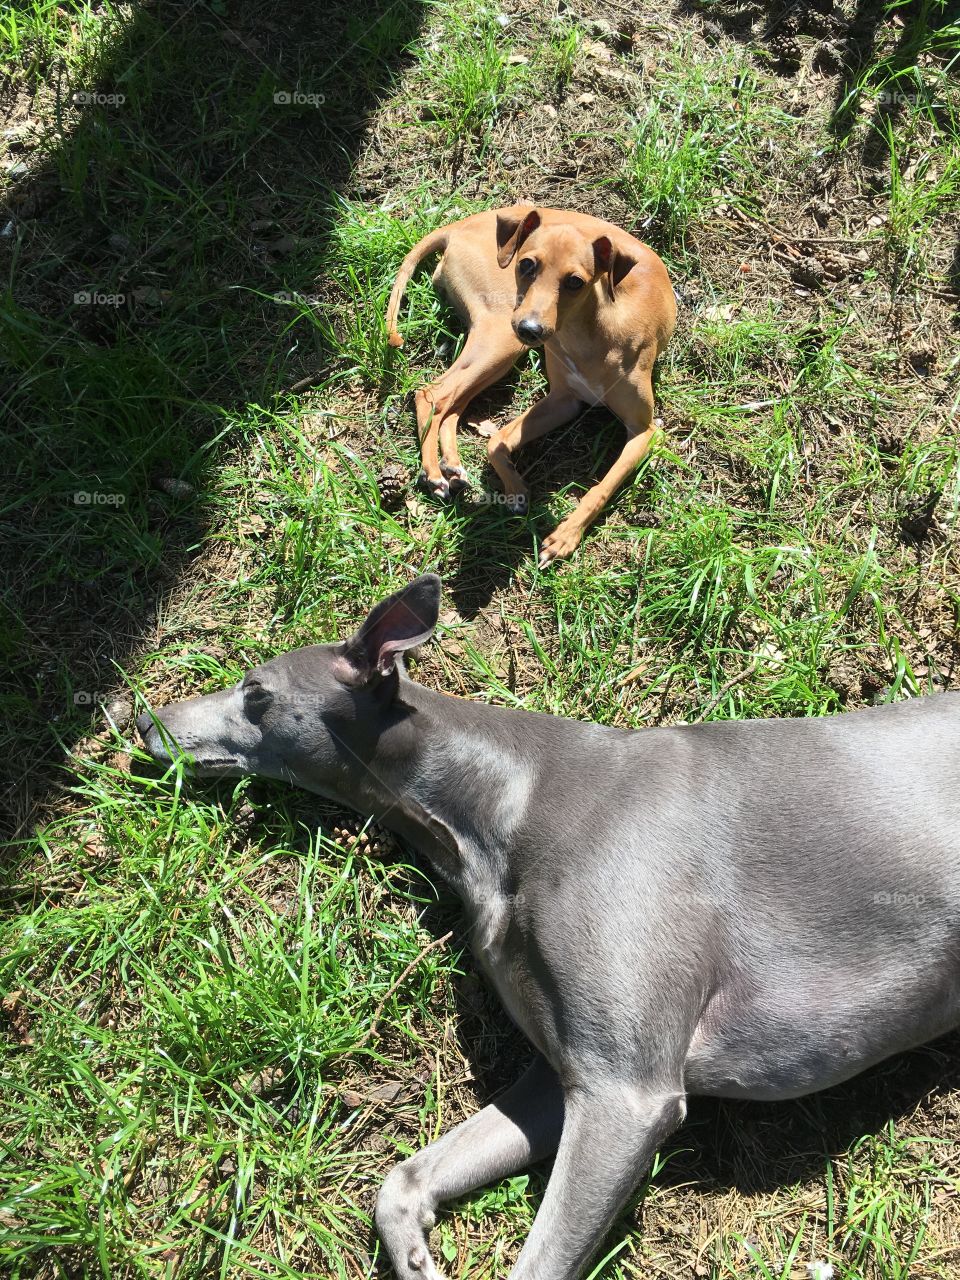 Libby the whippet laying on the lawn sunbathing next to Amber the Italian greyhound puppy looking at the camera in the summer